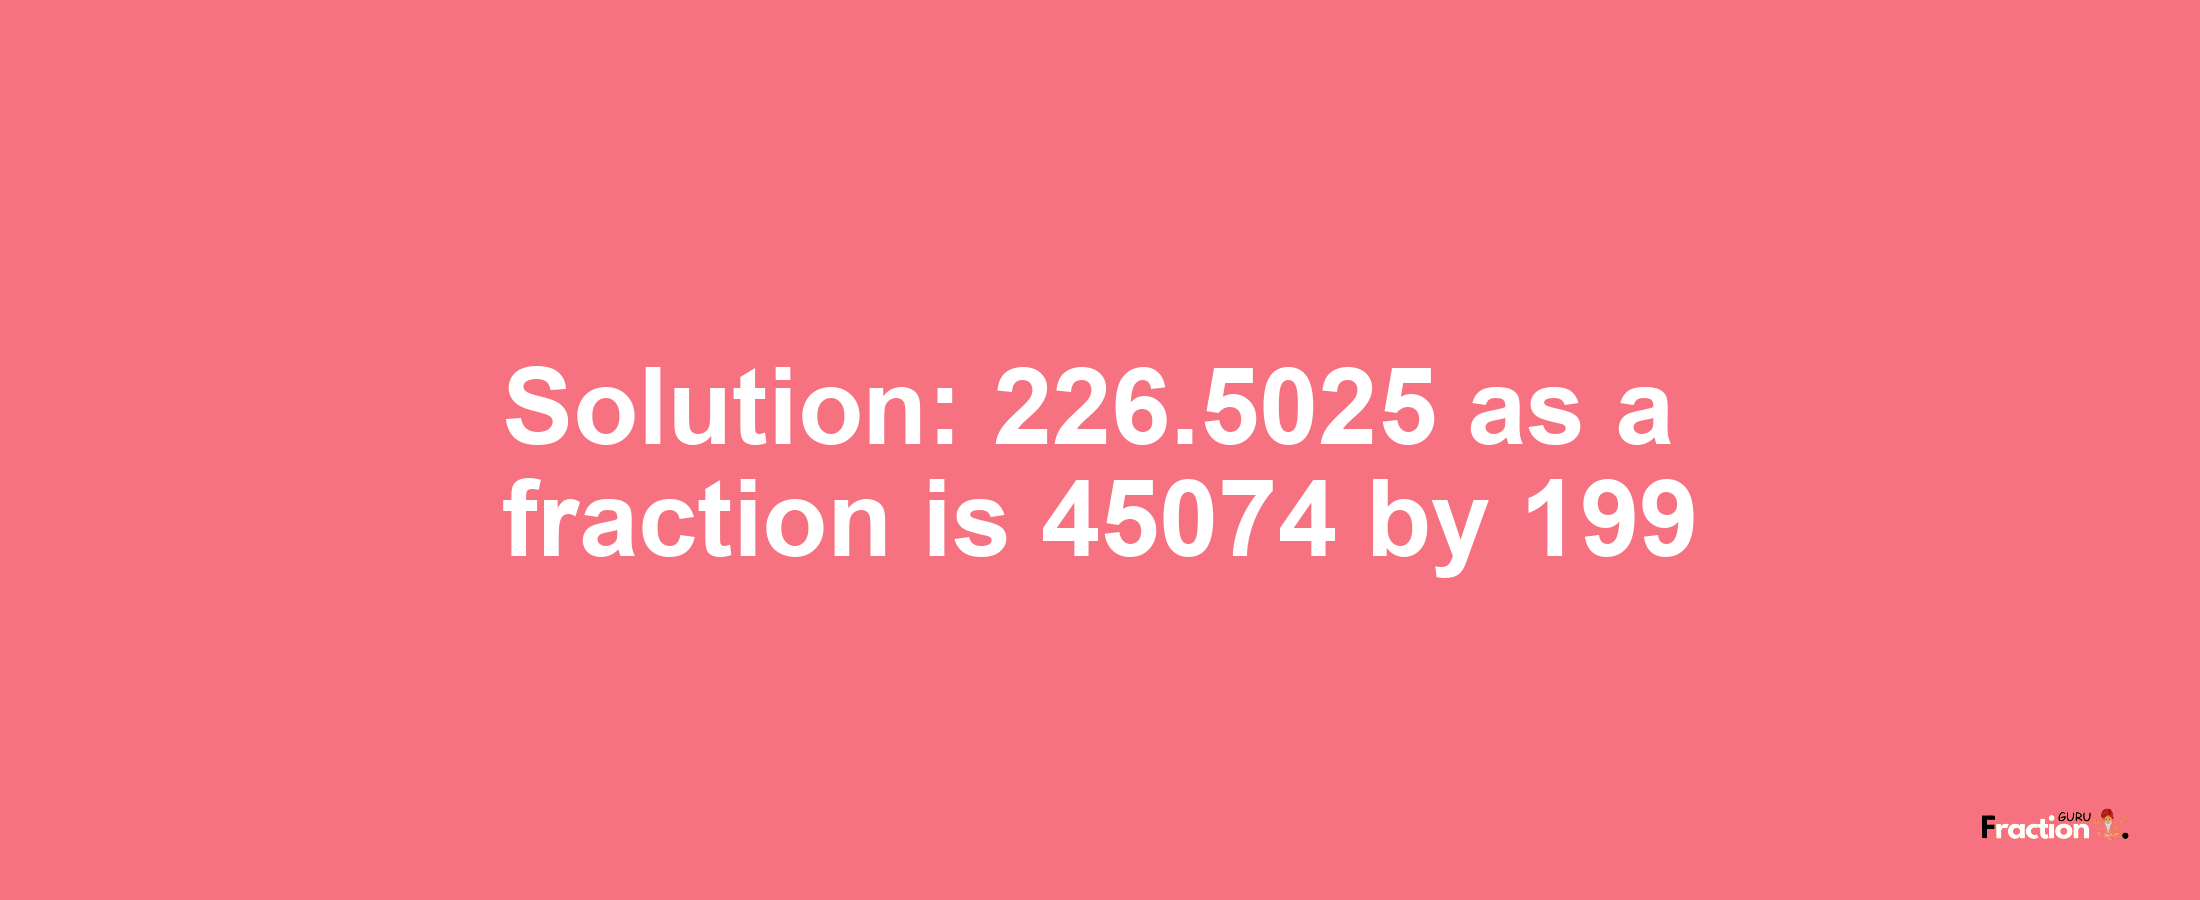 Solution:226.5025 as a fraction is 45074/199